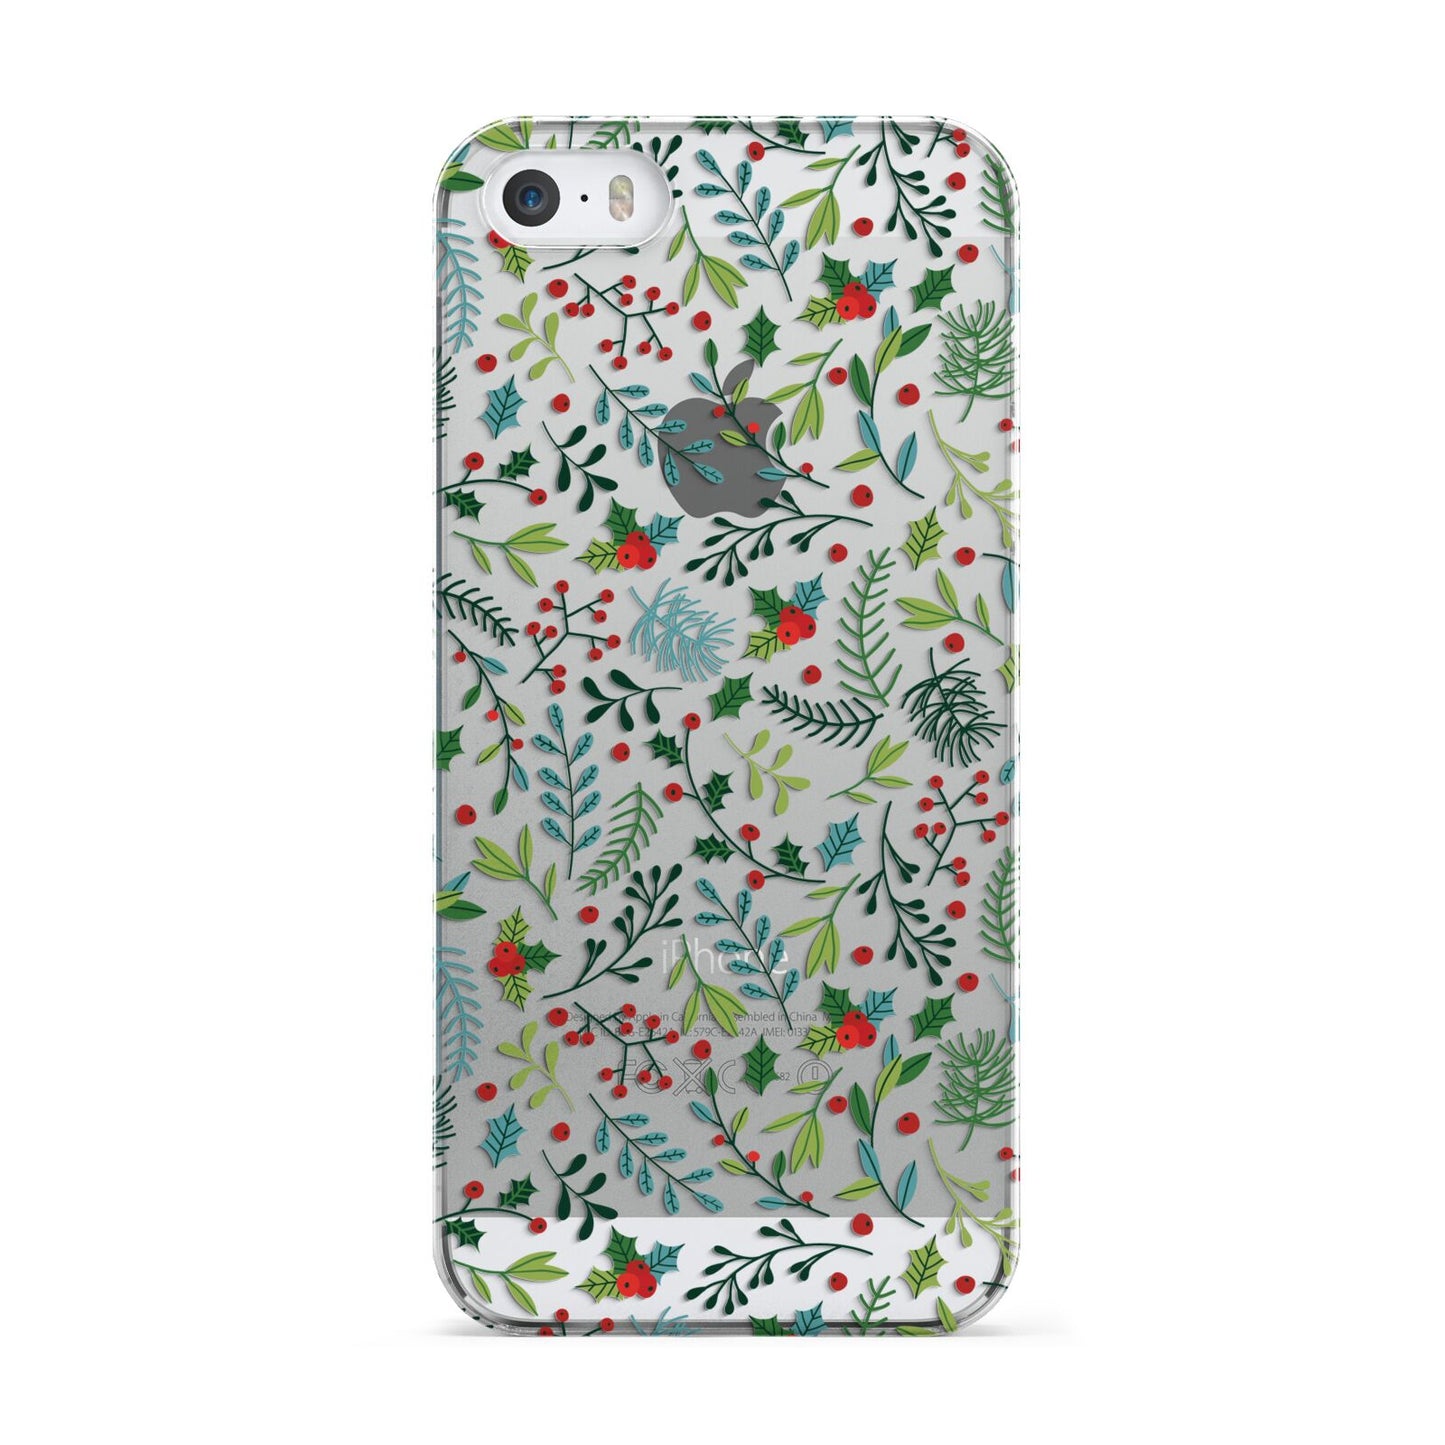 Winter Floral Apple iPhone 5 Case